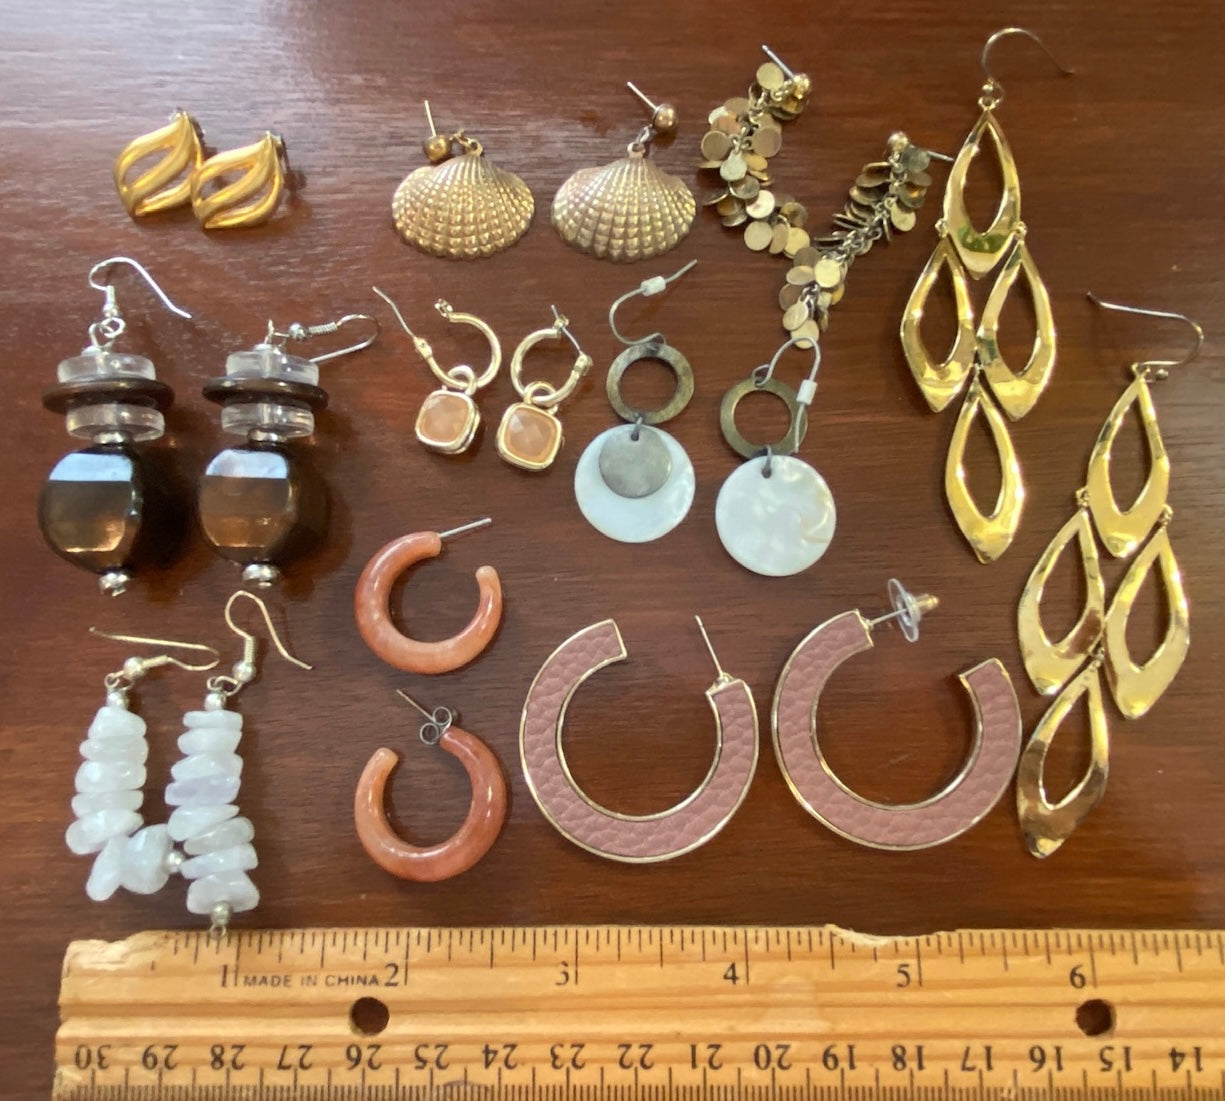 Lot of 10 Pairs Pierced Earrings Earth Tones Vintage Now Shell Gold Hoop Dangly